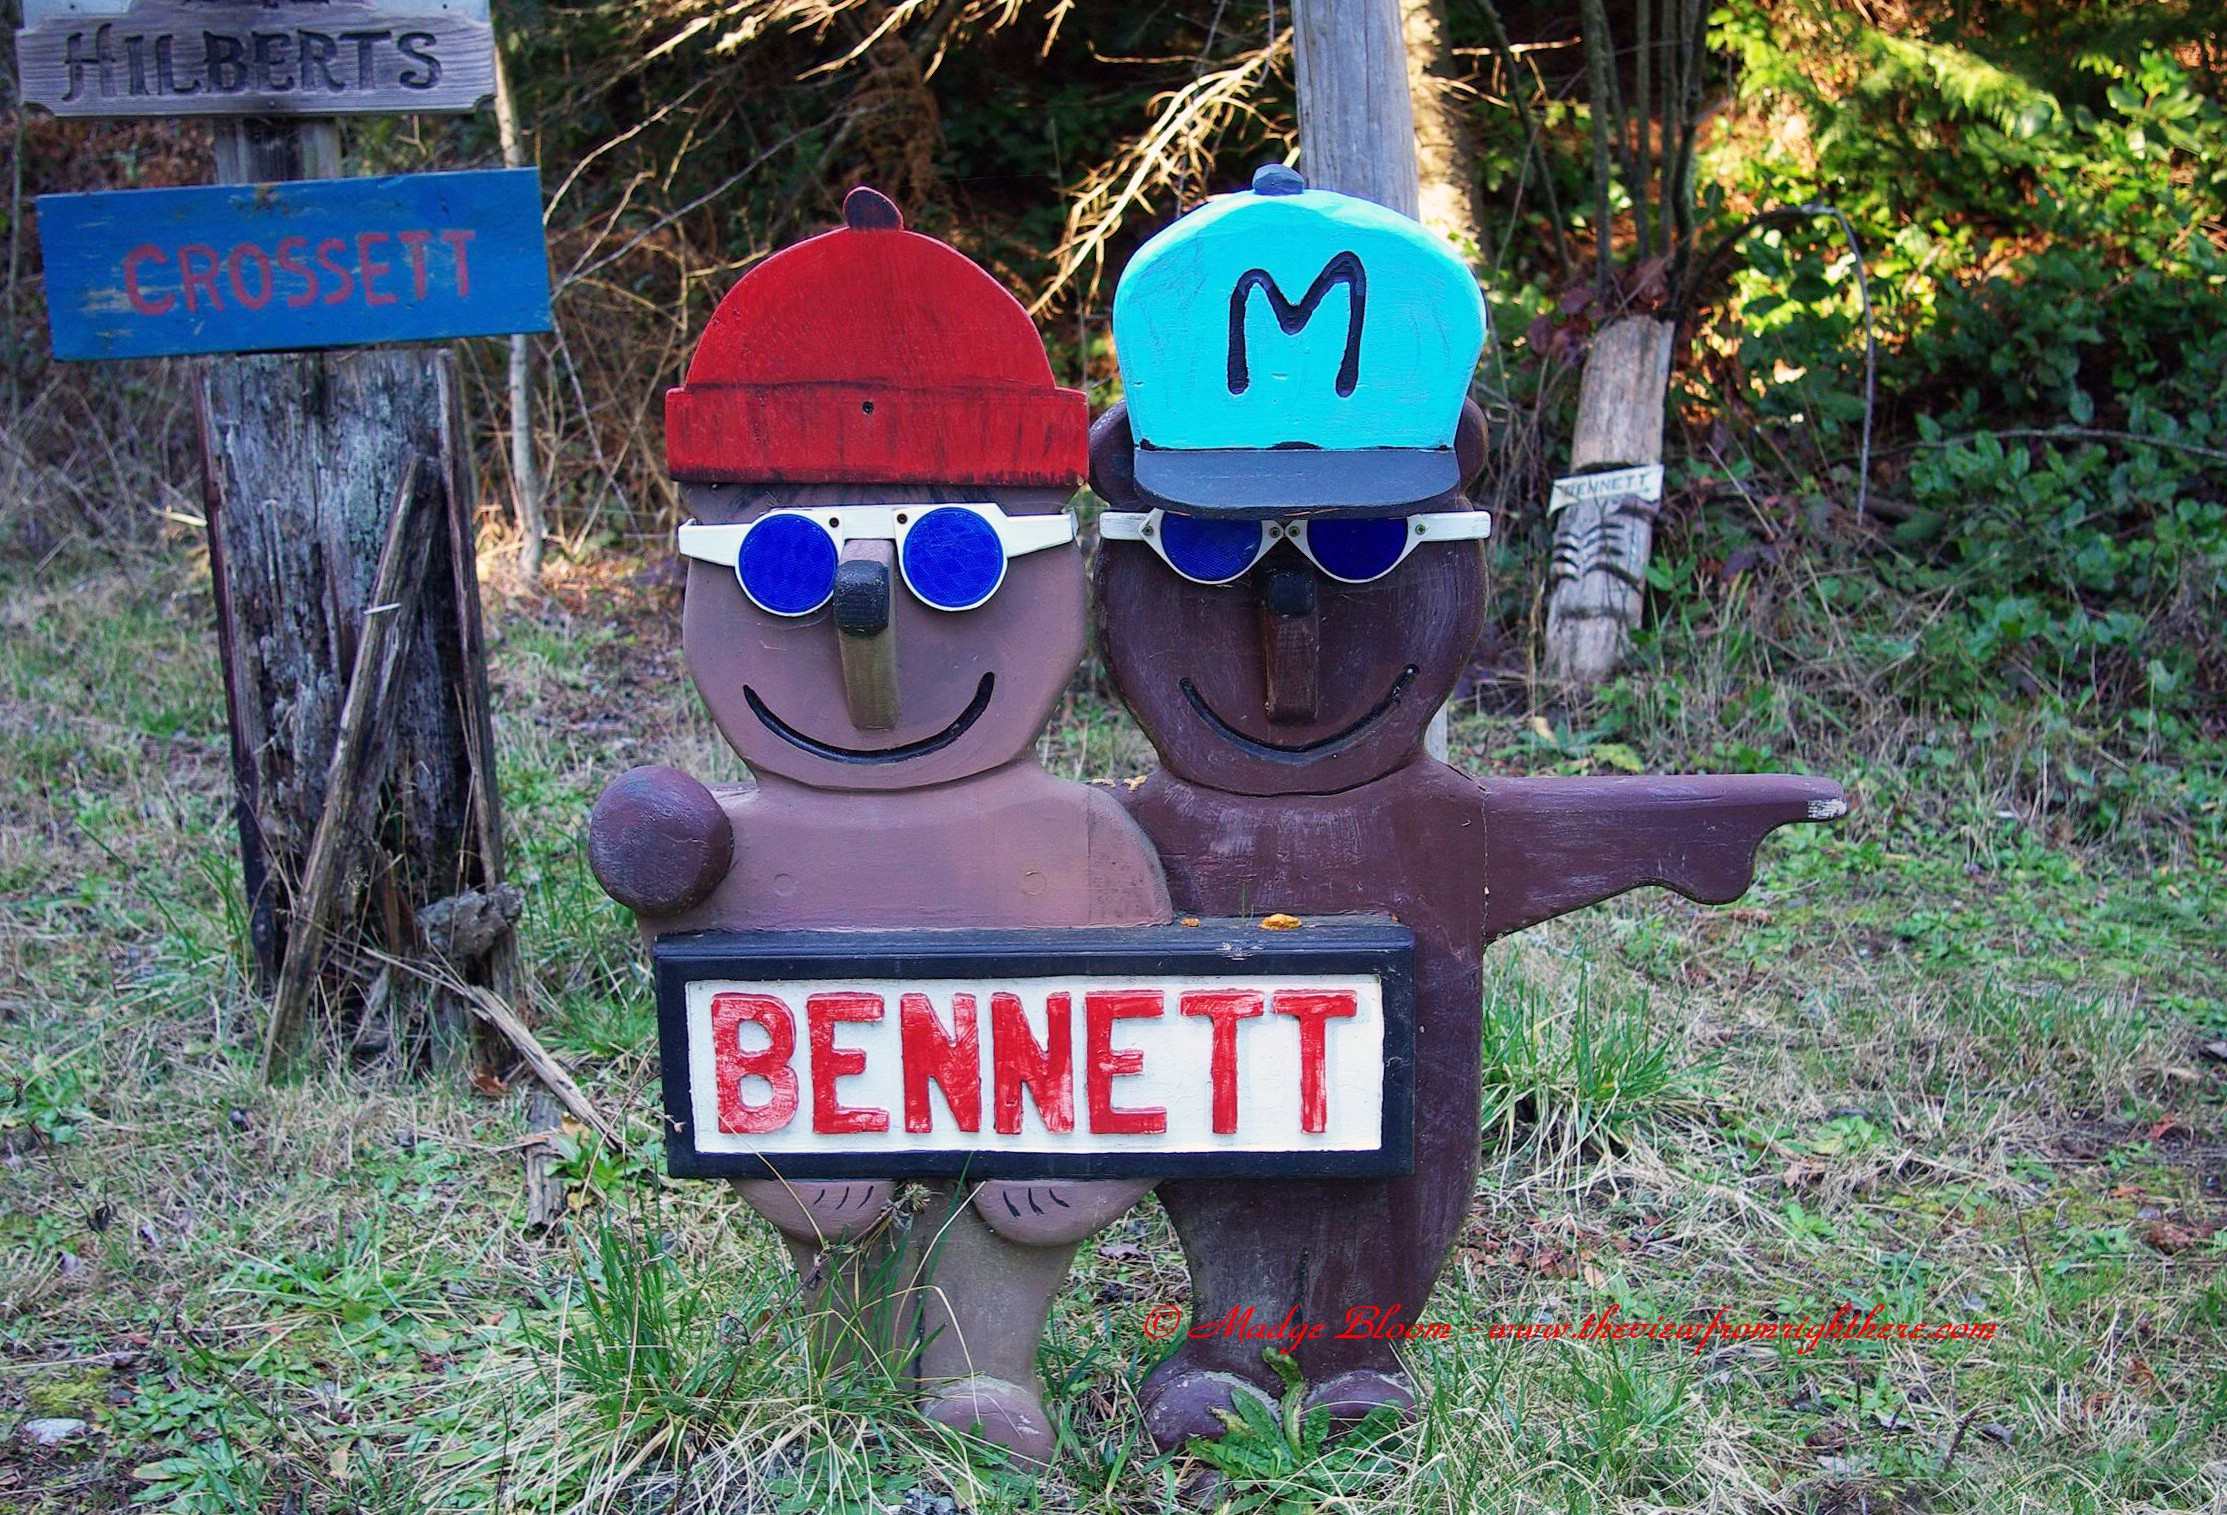 This Way to the Bennett Place!